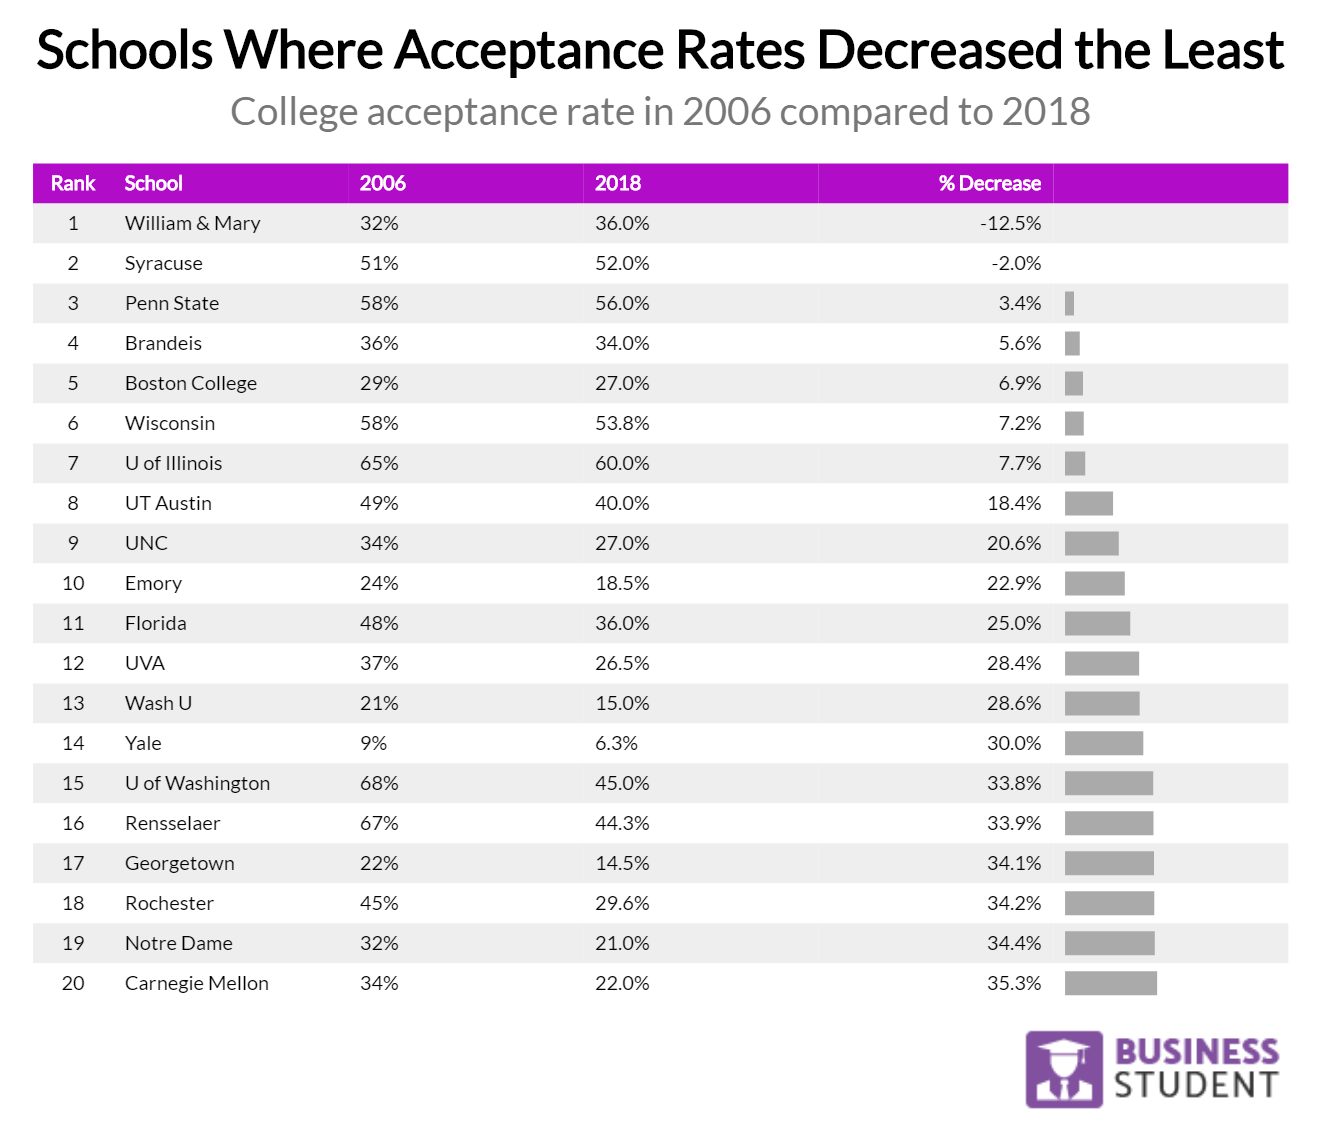 schools where acceptance rates decreased the least 2018 09 21T19 02 29.789Z